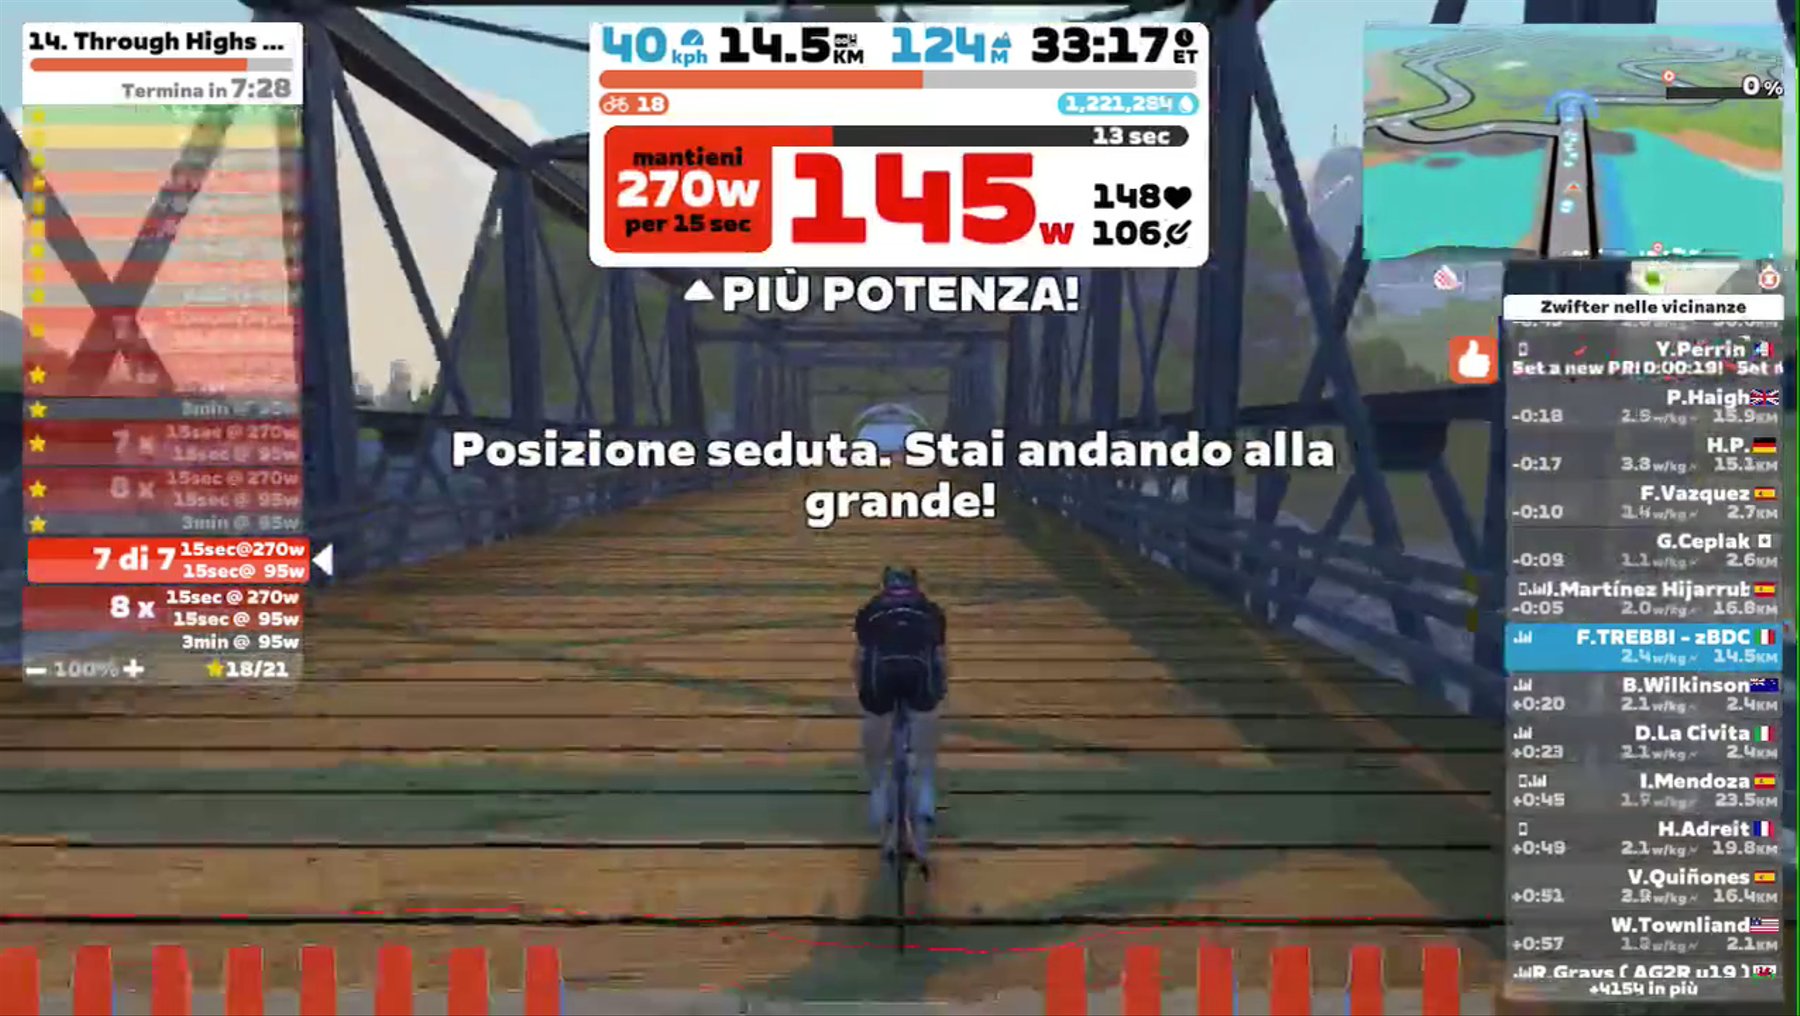 Zwift - 14. Through Highs and Lows in Watopia